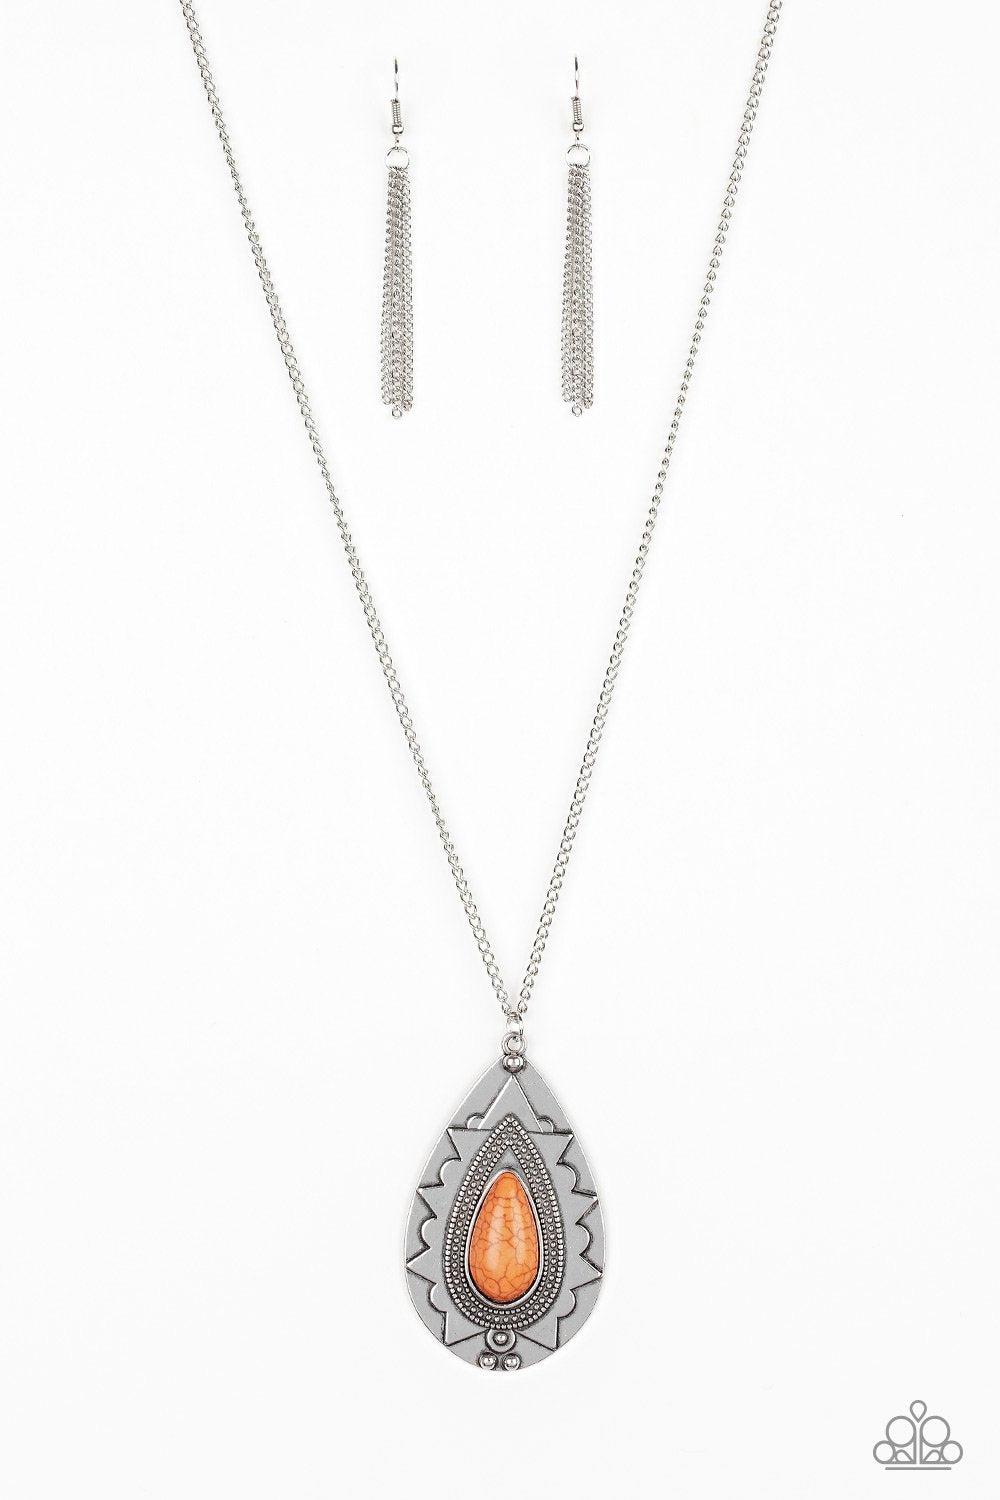 Sedona Solstice Orange Stone and Silver Necklace - Paparazzi Accessories- lightbox - CarasShop.com - $5 Jewelry by Cara Jewels